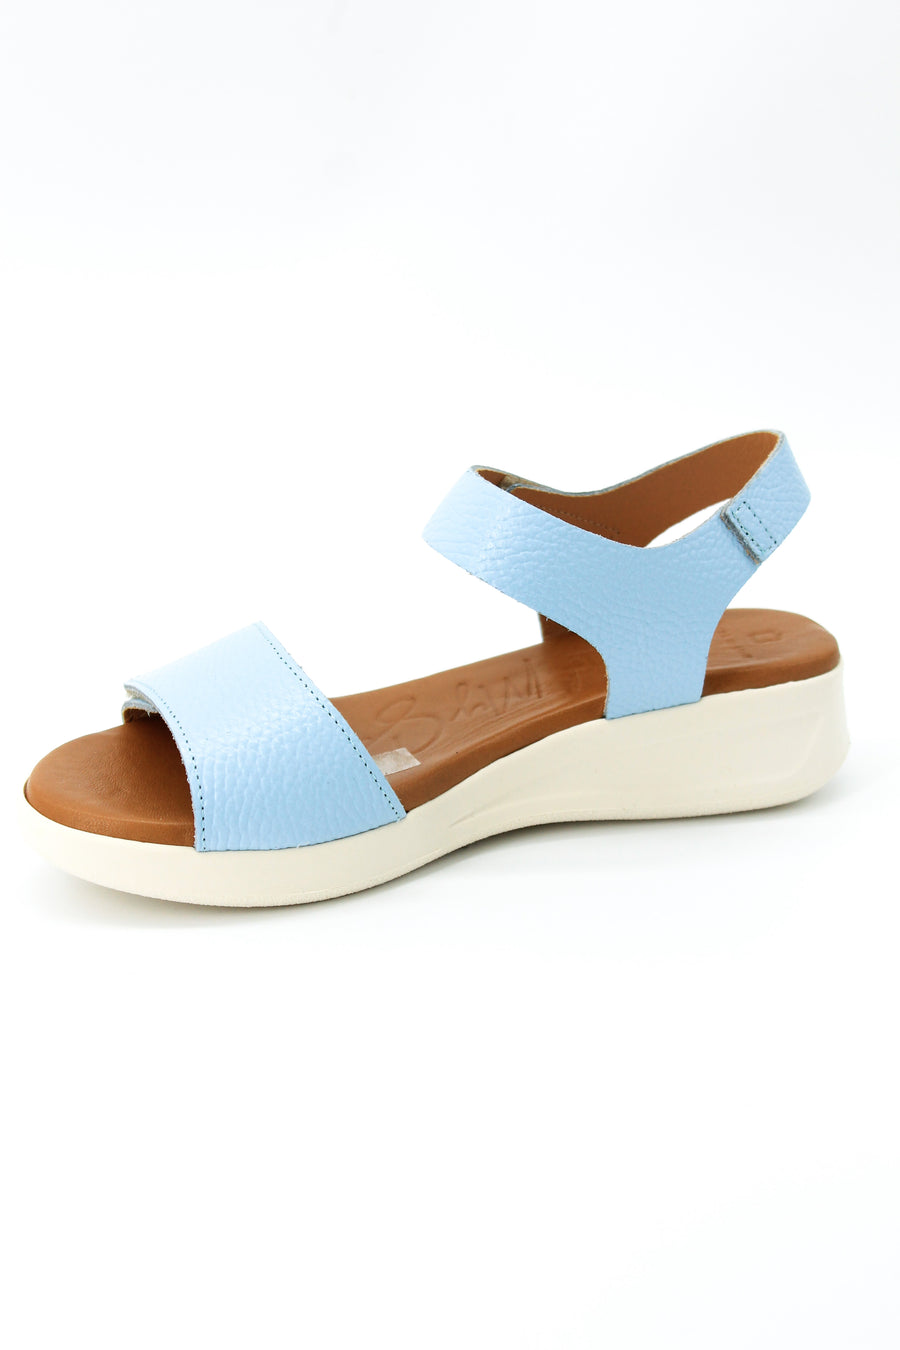 Oh My Sandals 5183 Blue